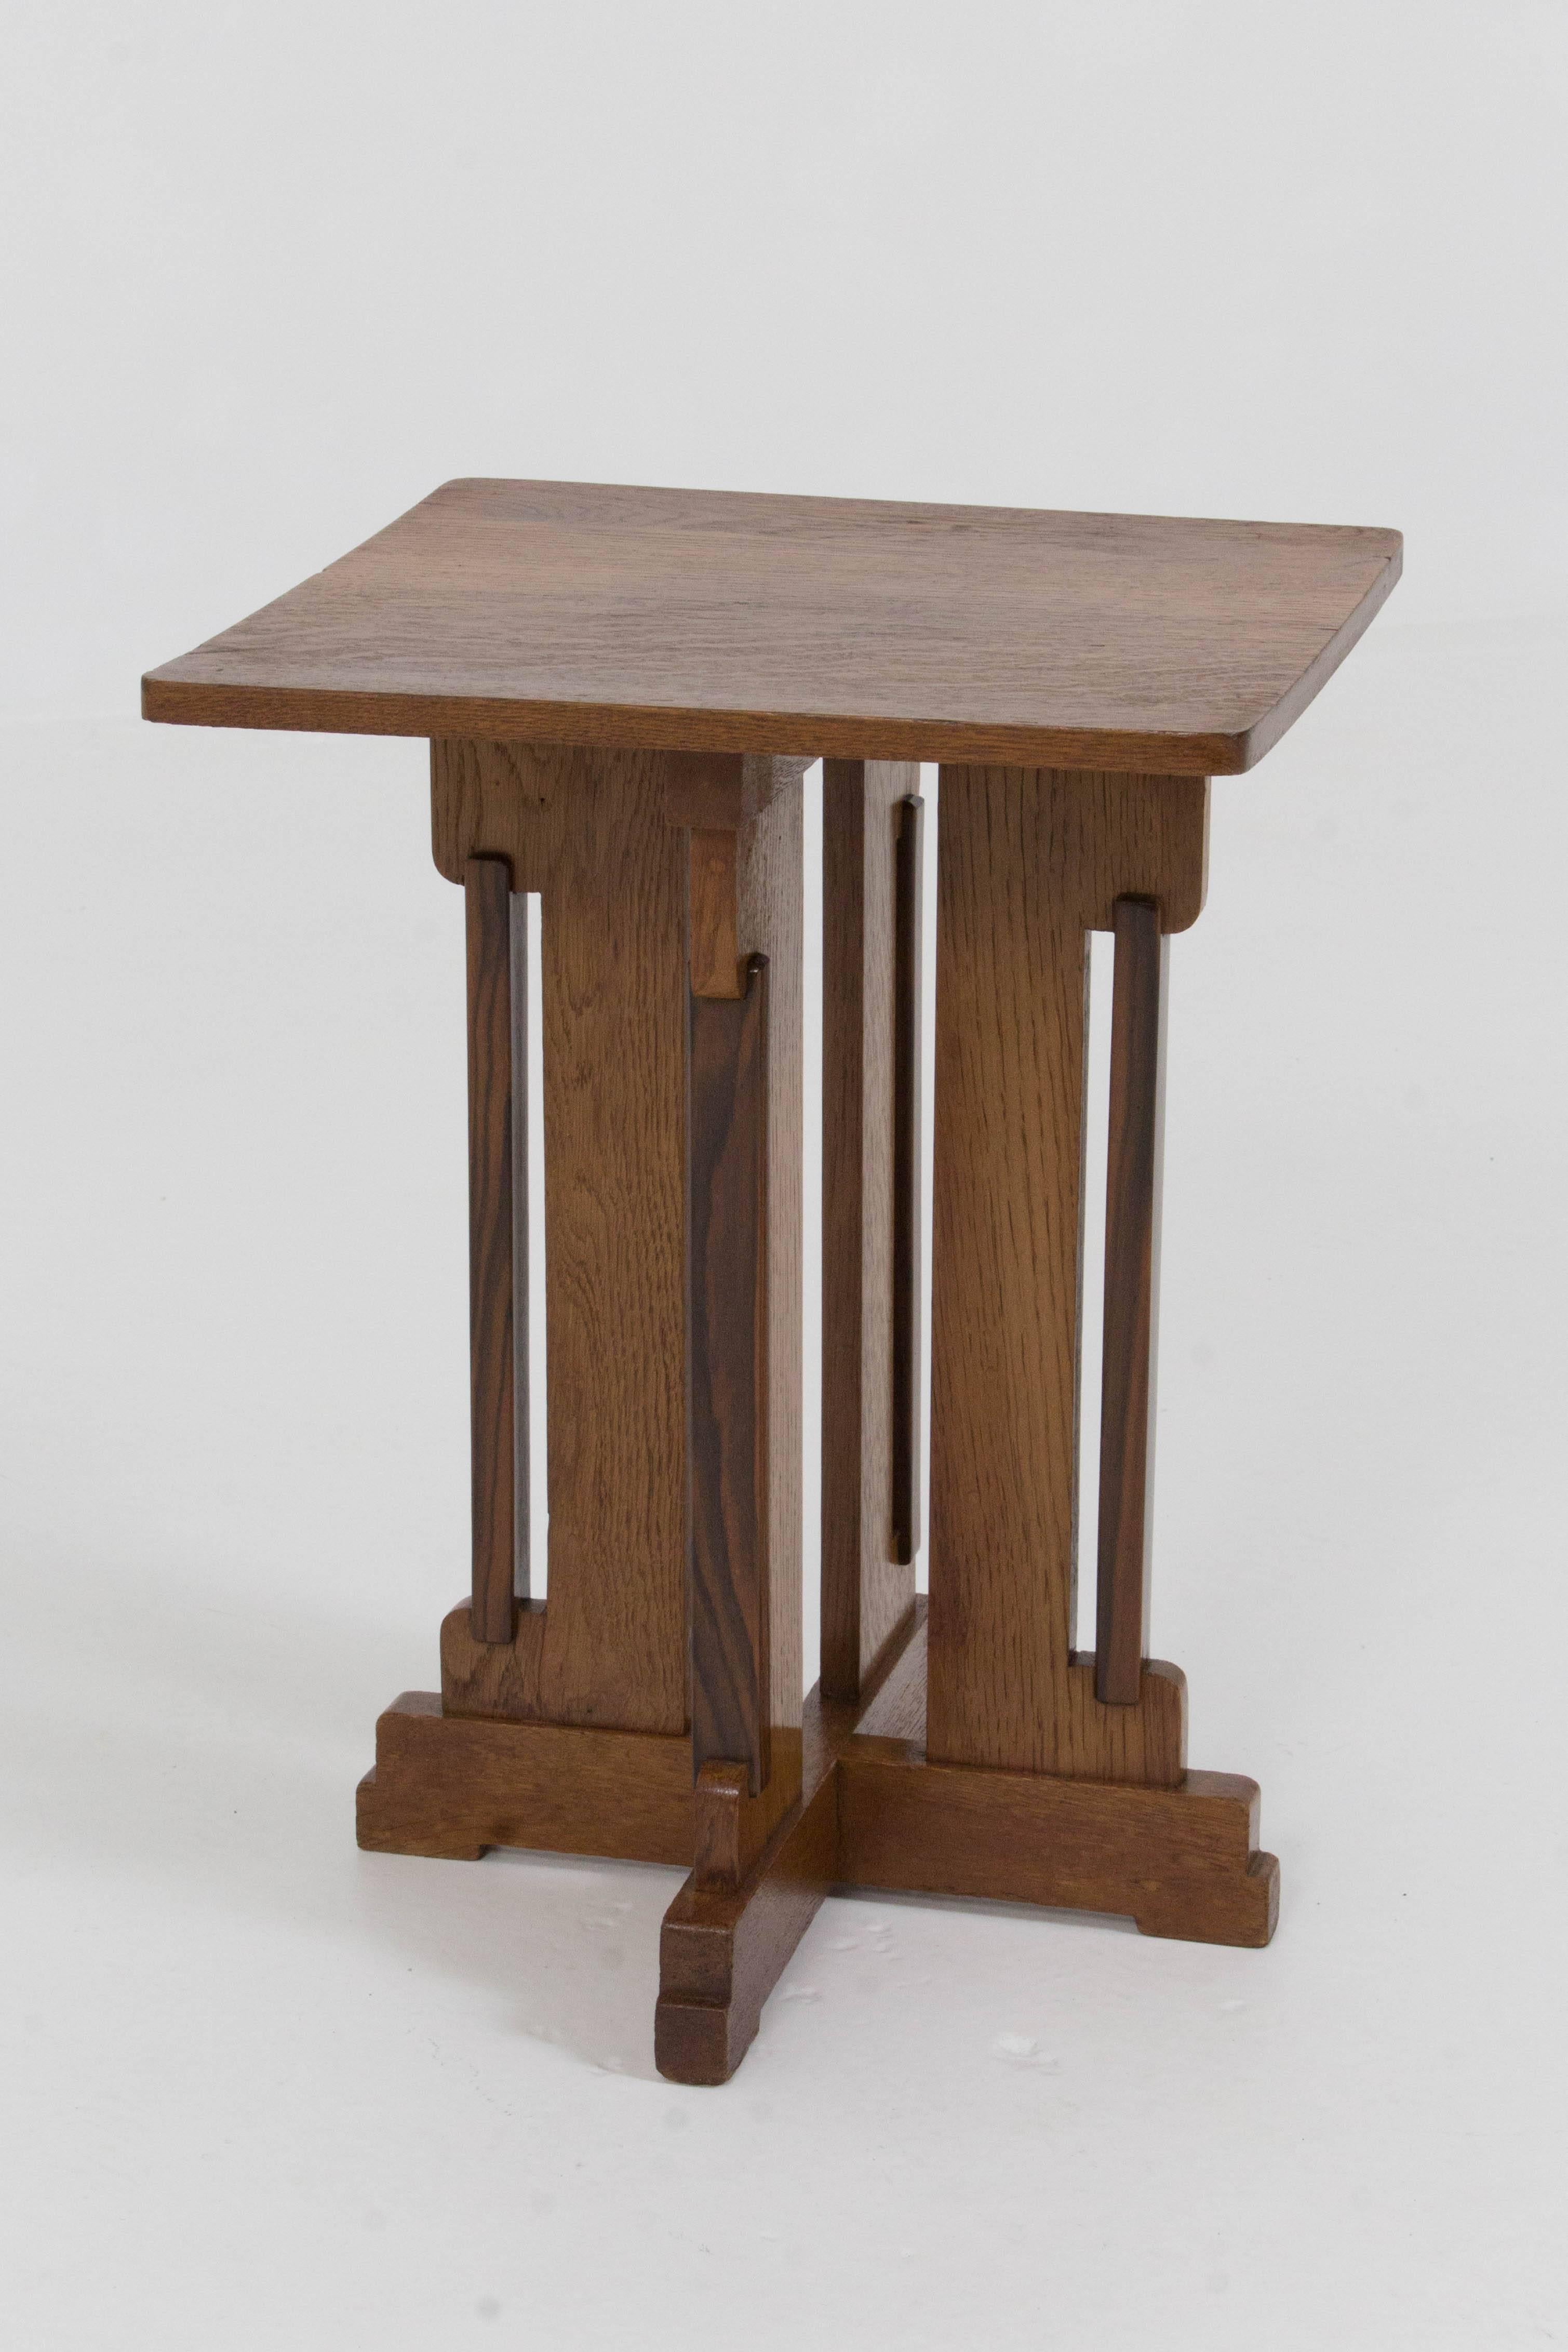 Stylish Art Deco Haagse school occasional table by P.E.L. Izeren for Genneper Molen, 1920s.
Solid oak with solid ebony Macassar linings.
In good original condition with minor wear consistent with age and use,
preserving a beautiful patina.